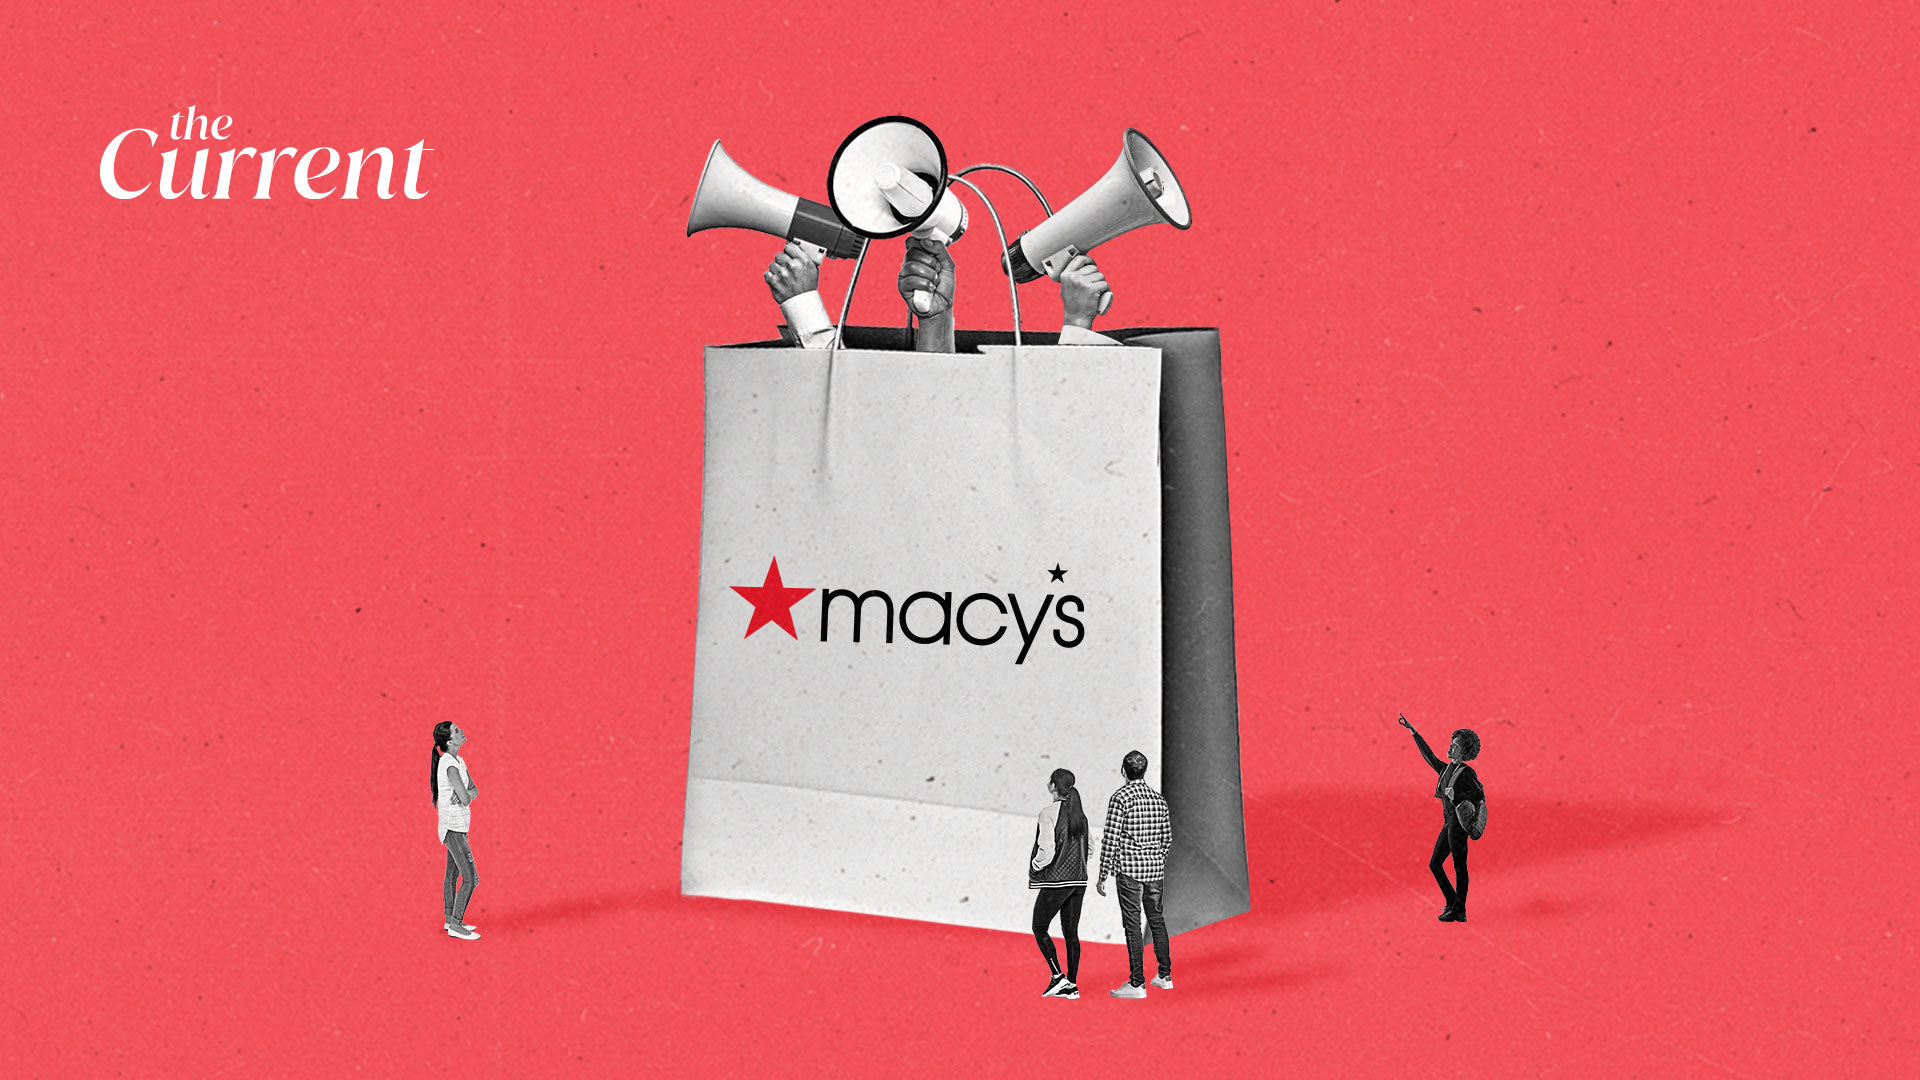 Macy’s expanded retail media strategy is calling all brands | The Current